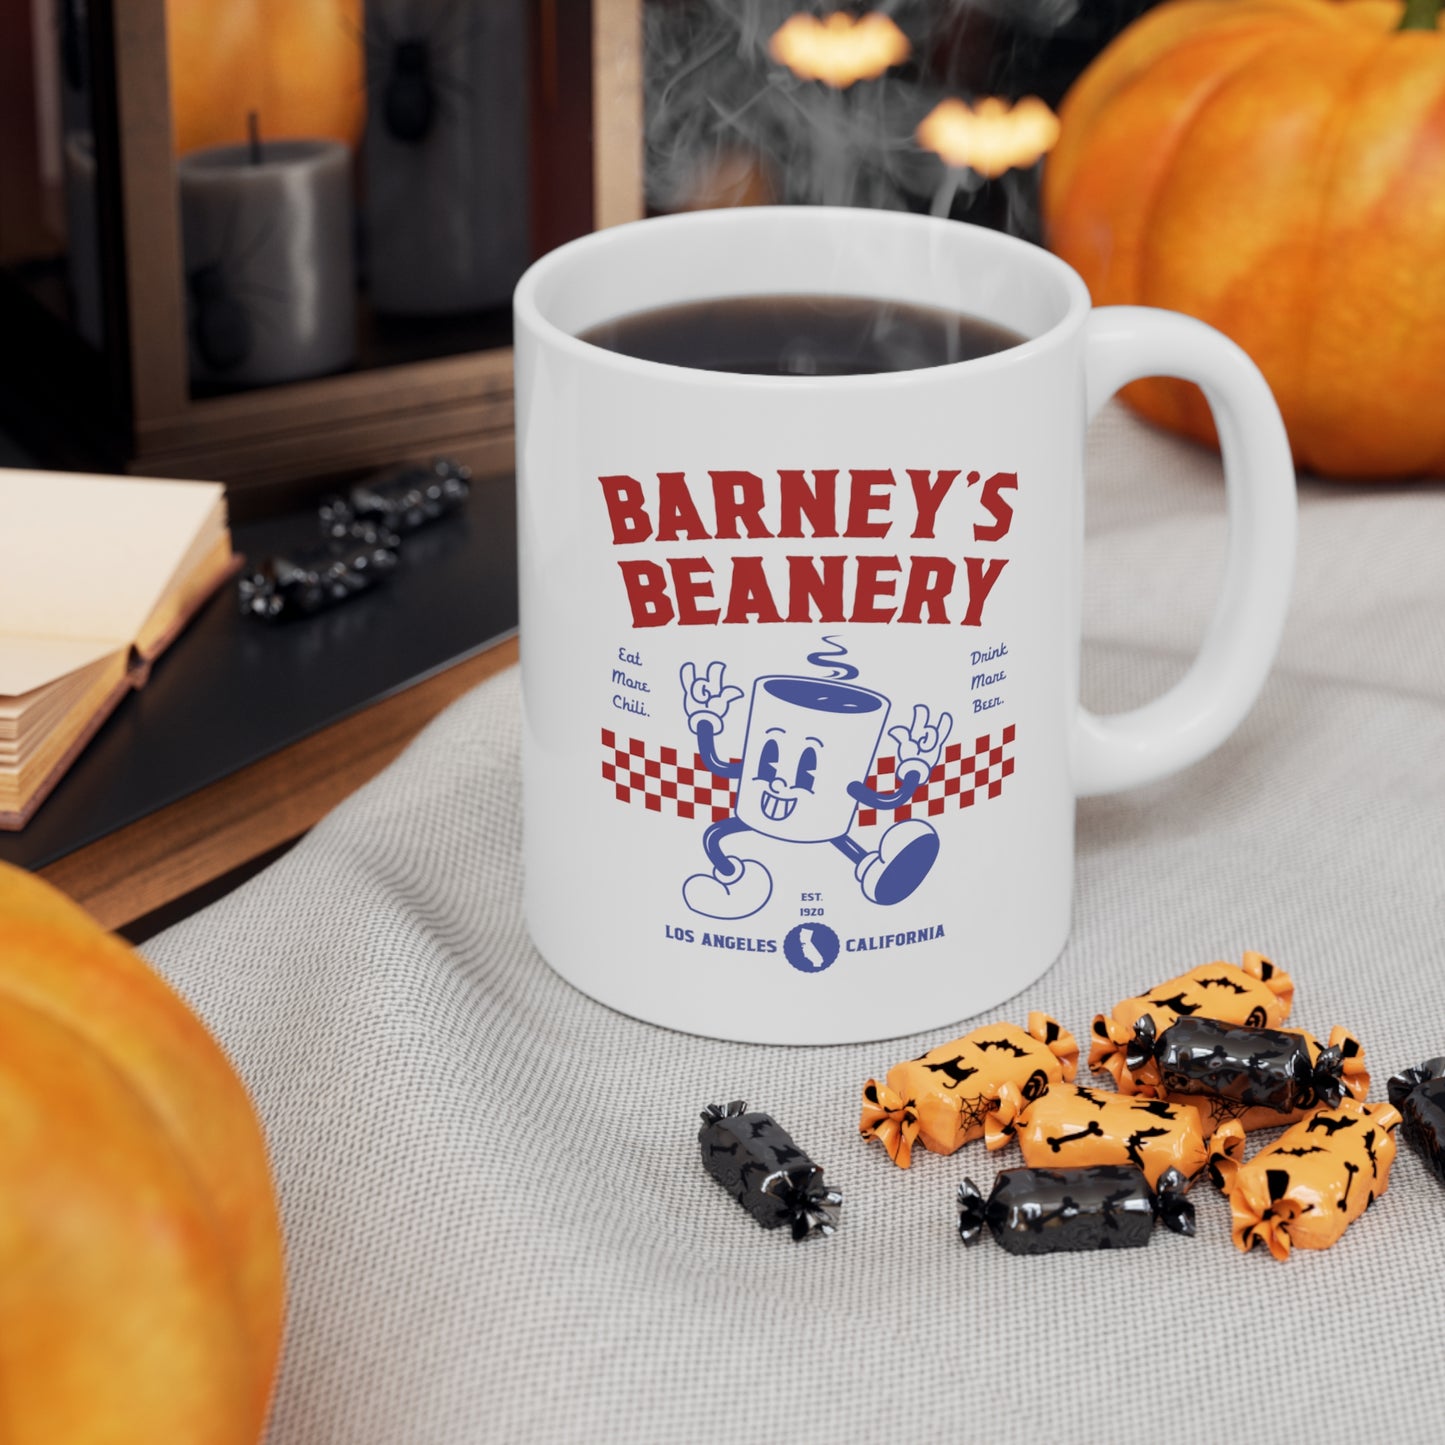 Eat More Chili. Drink More Beer. | BARNEY'S BEANERY - Red & Blue Coffee Mug 11oz